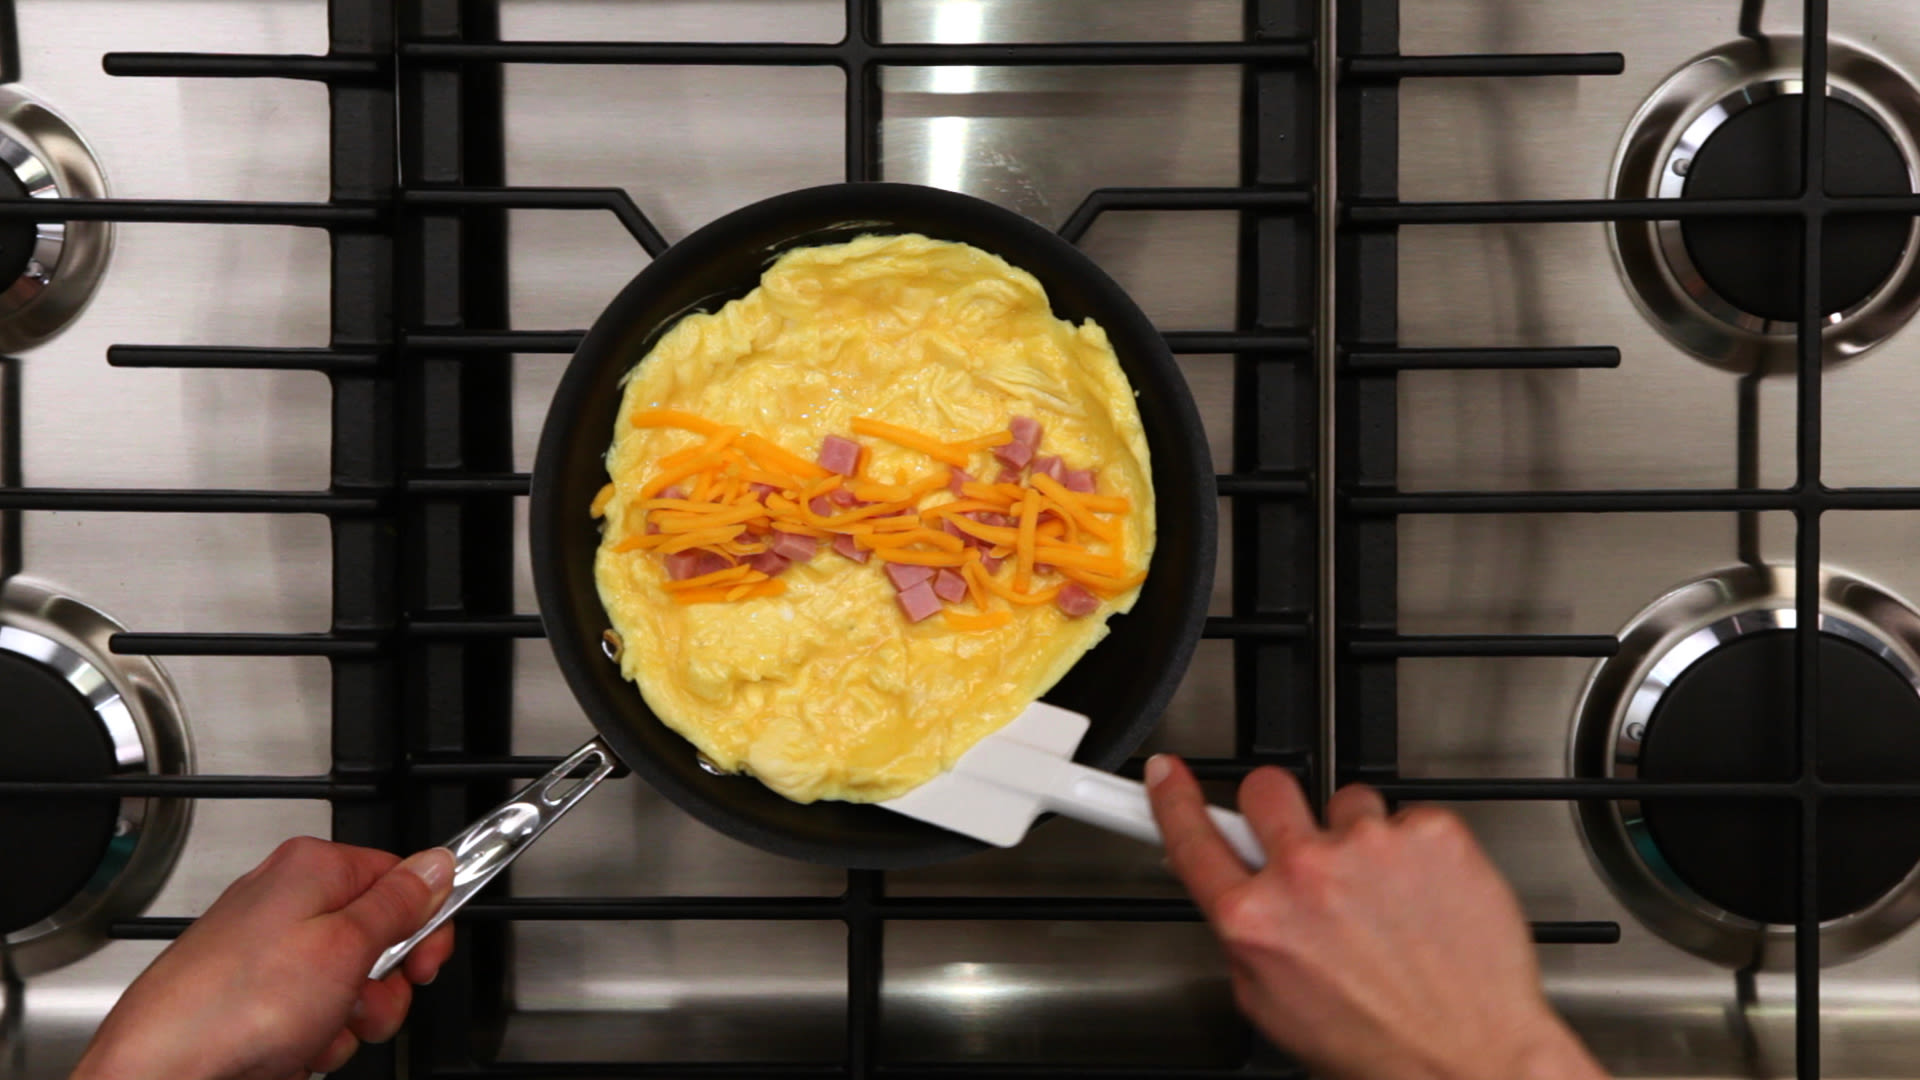 How to Make an Omelette